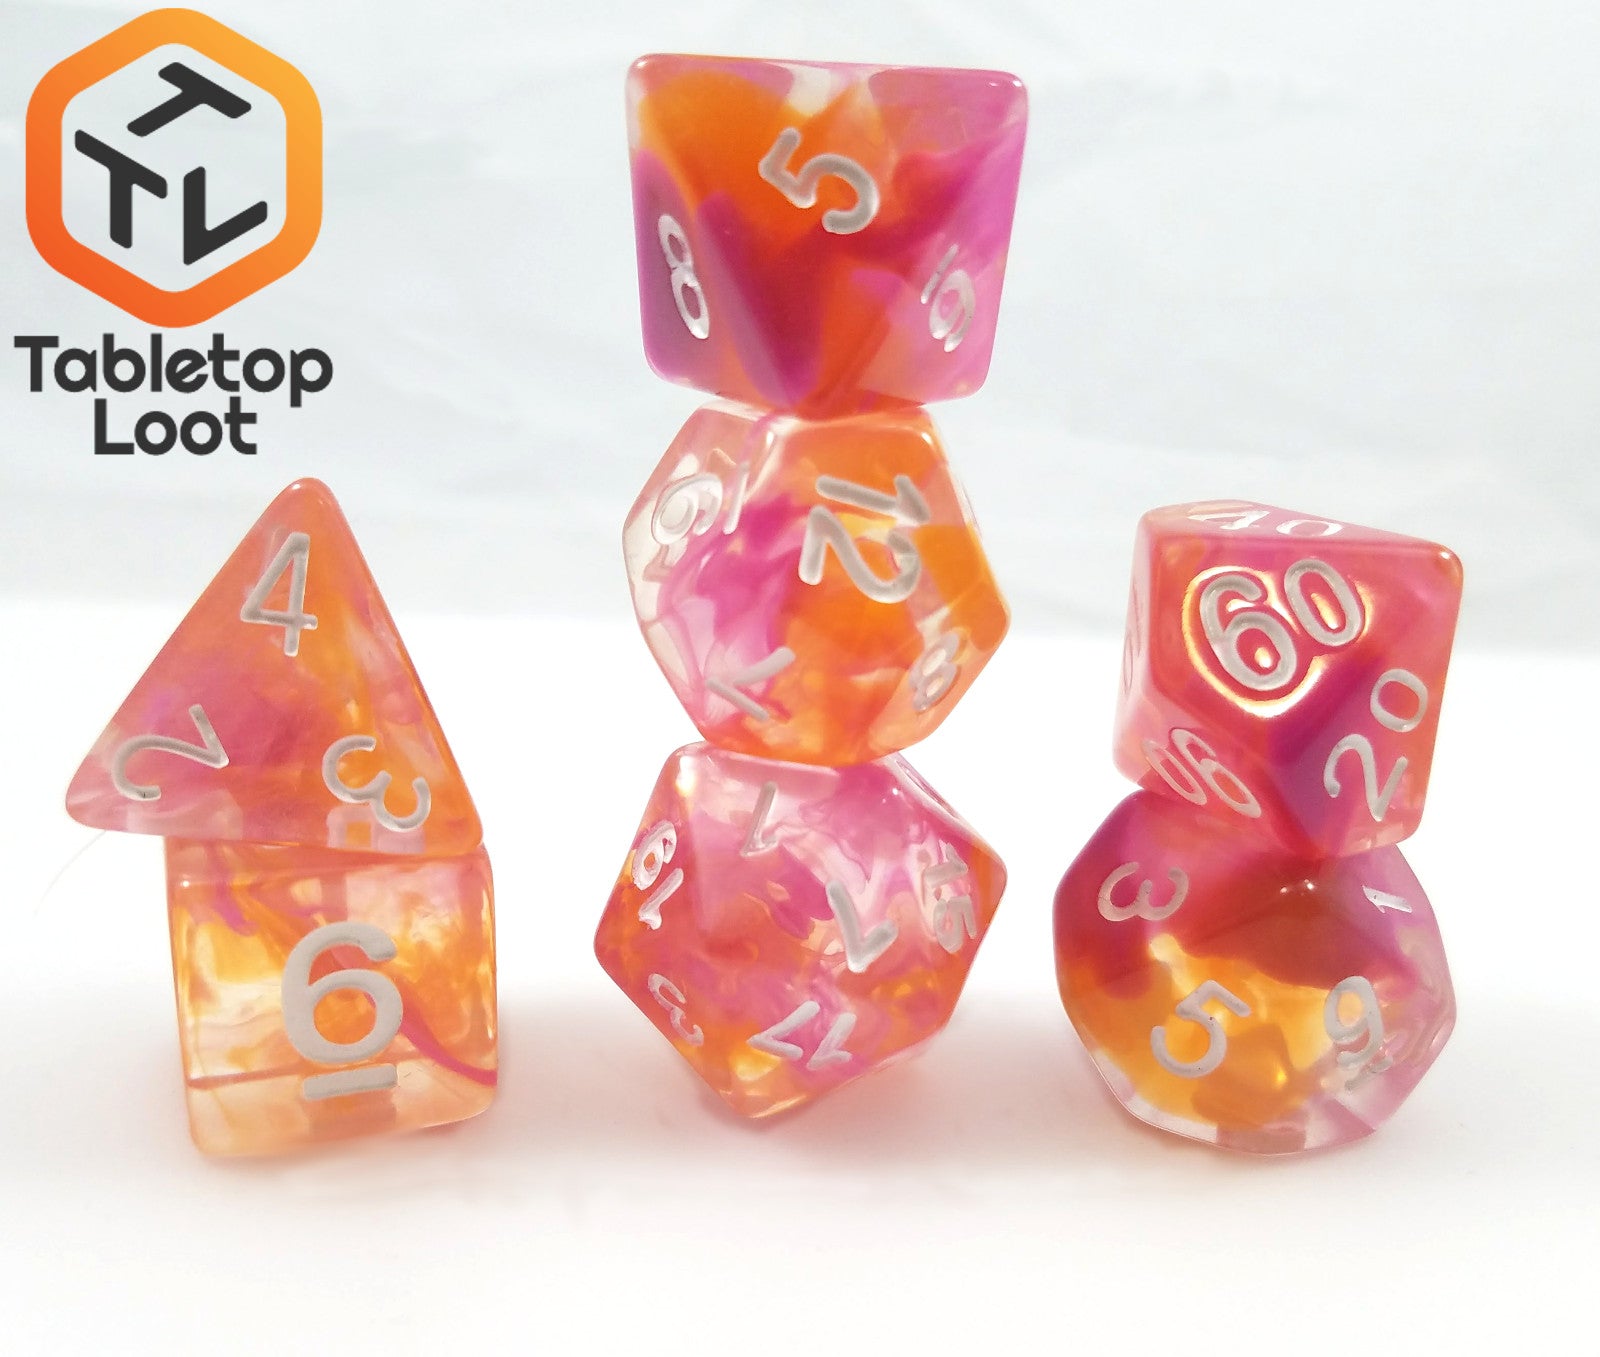 The Pink Lemonade 7 piece dice set from Tabletop Loot with swirls of pink, orange, and yellow in clear resin with white numbering.